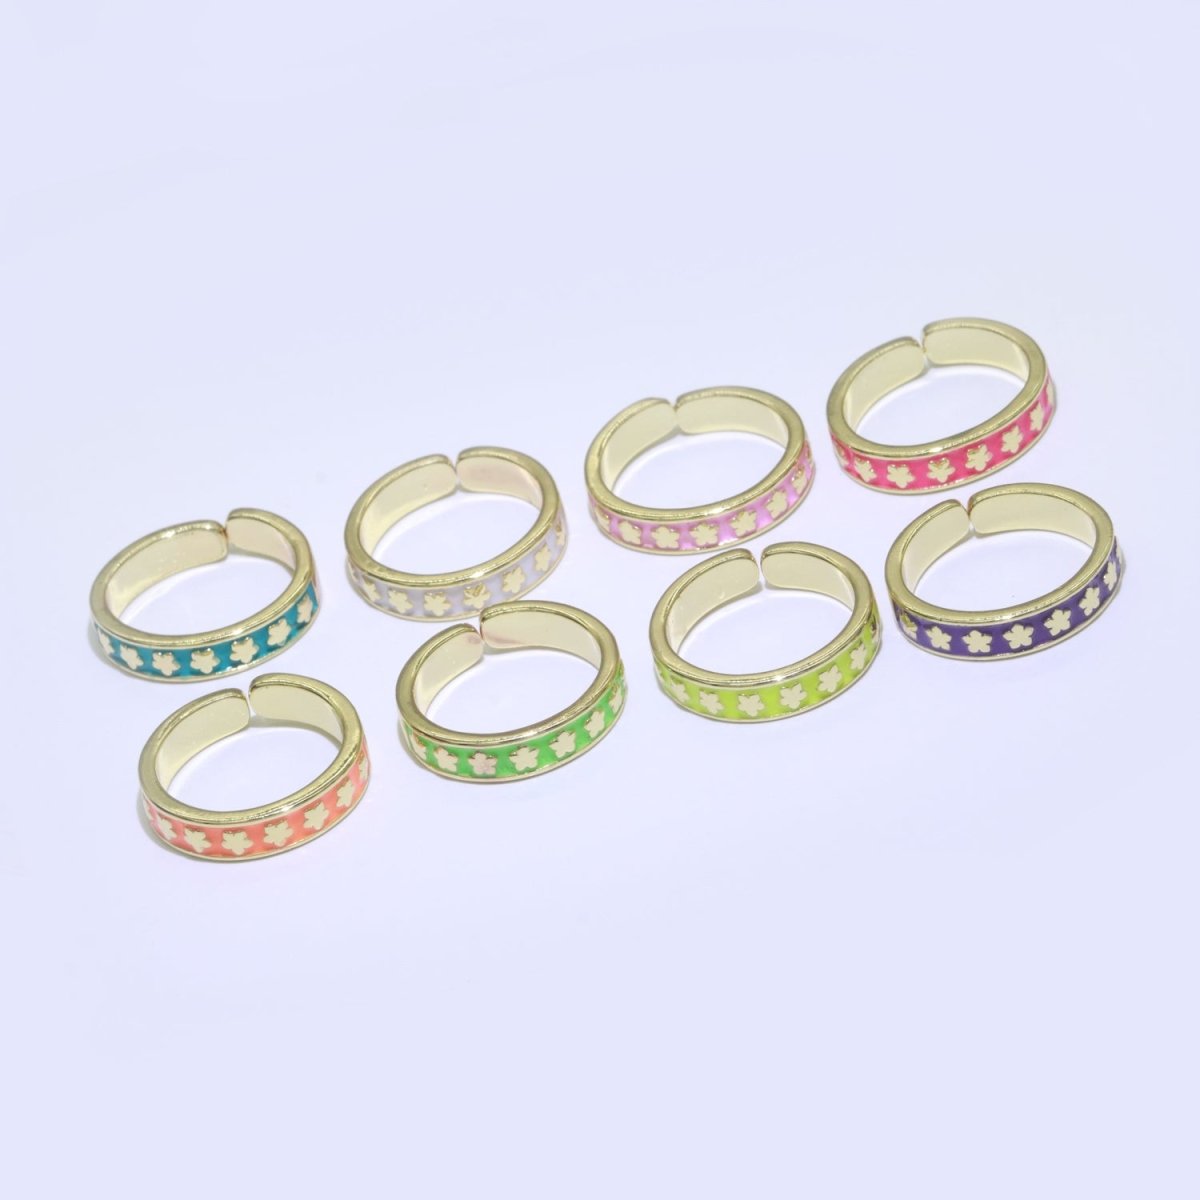 1x Dainty Colorful Enamel Ring Multicolor Enamel Band Star Ring Stacking Open Ring Adjustable Ring Yellow Teal Pink Green White Neon Ring O-387 ~ O-394 - DLUXCA